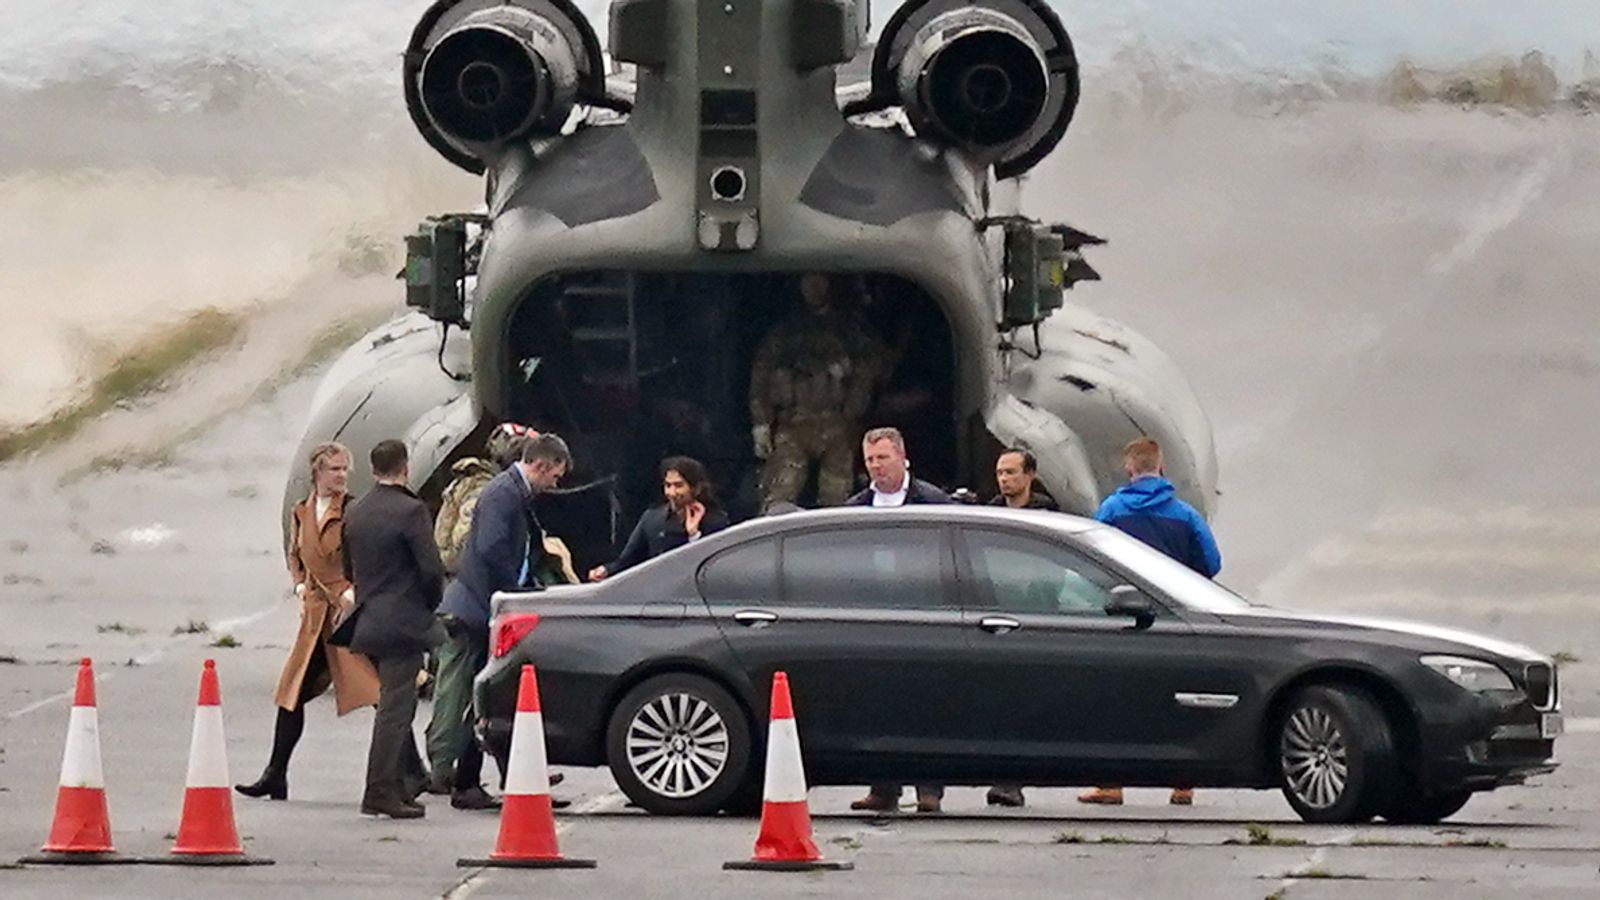 Suella Braverman avoids press questions after travelling to Manston in £3,500-an-hour military helicopter